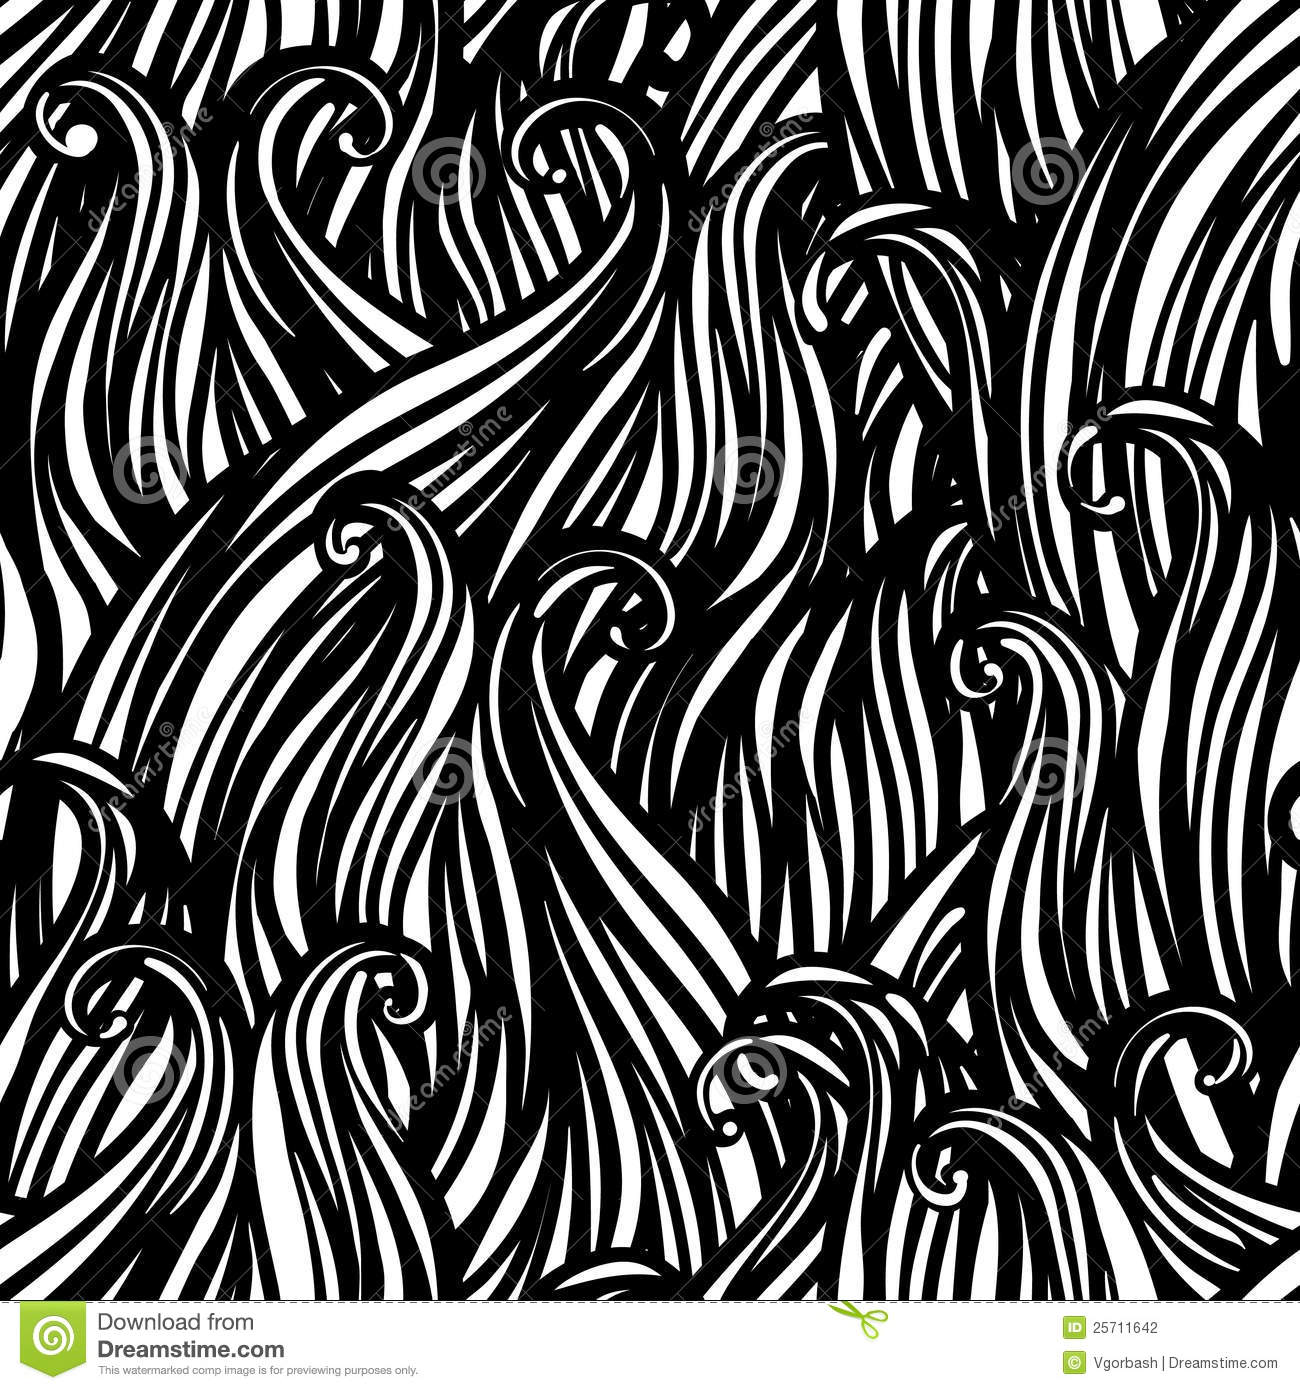 Black and White Abstract Designs